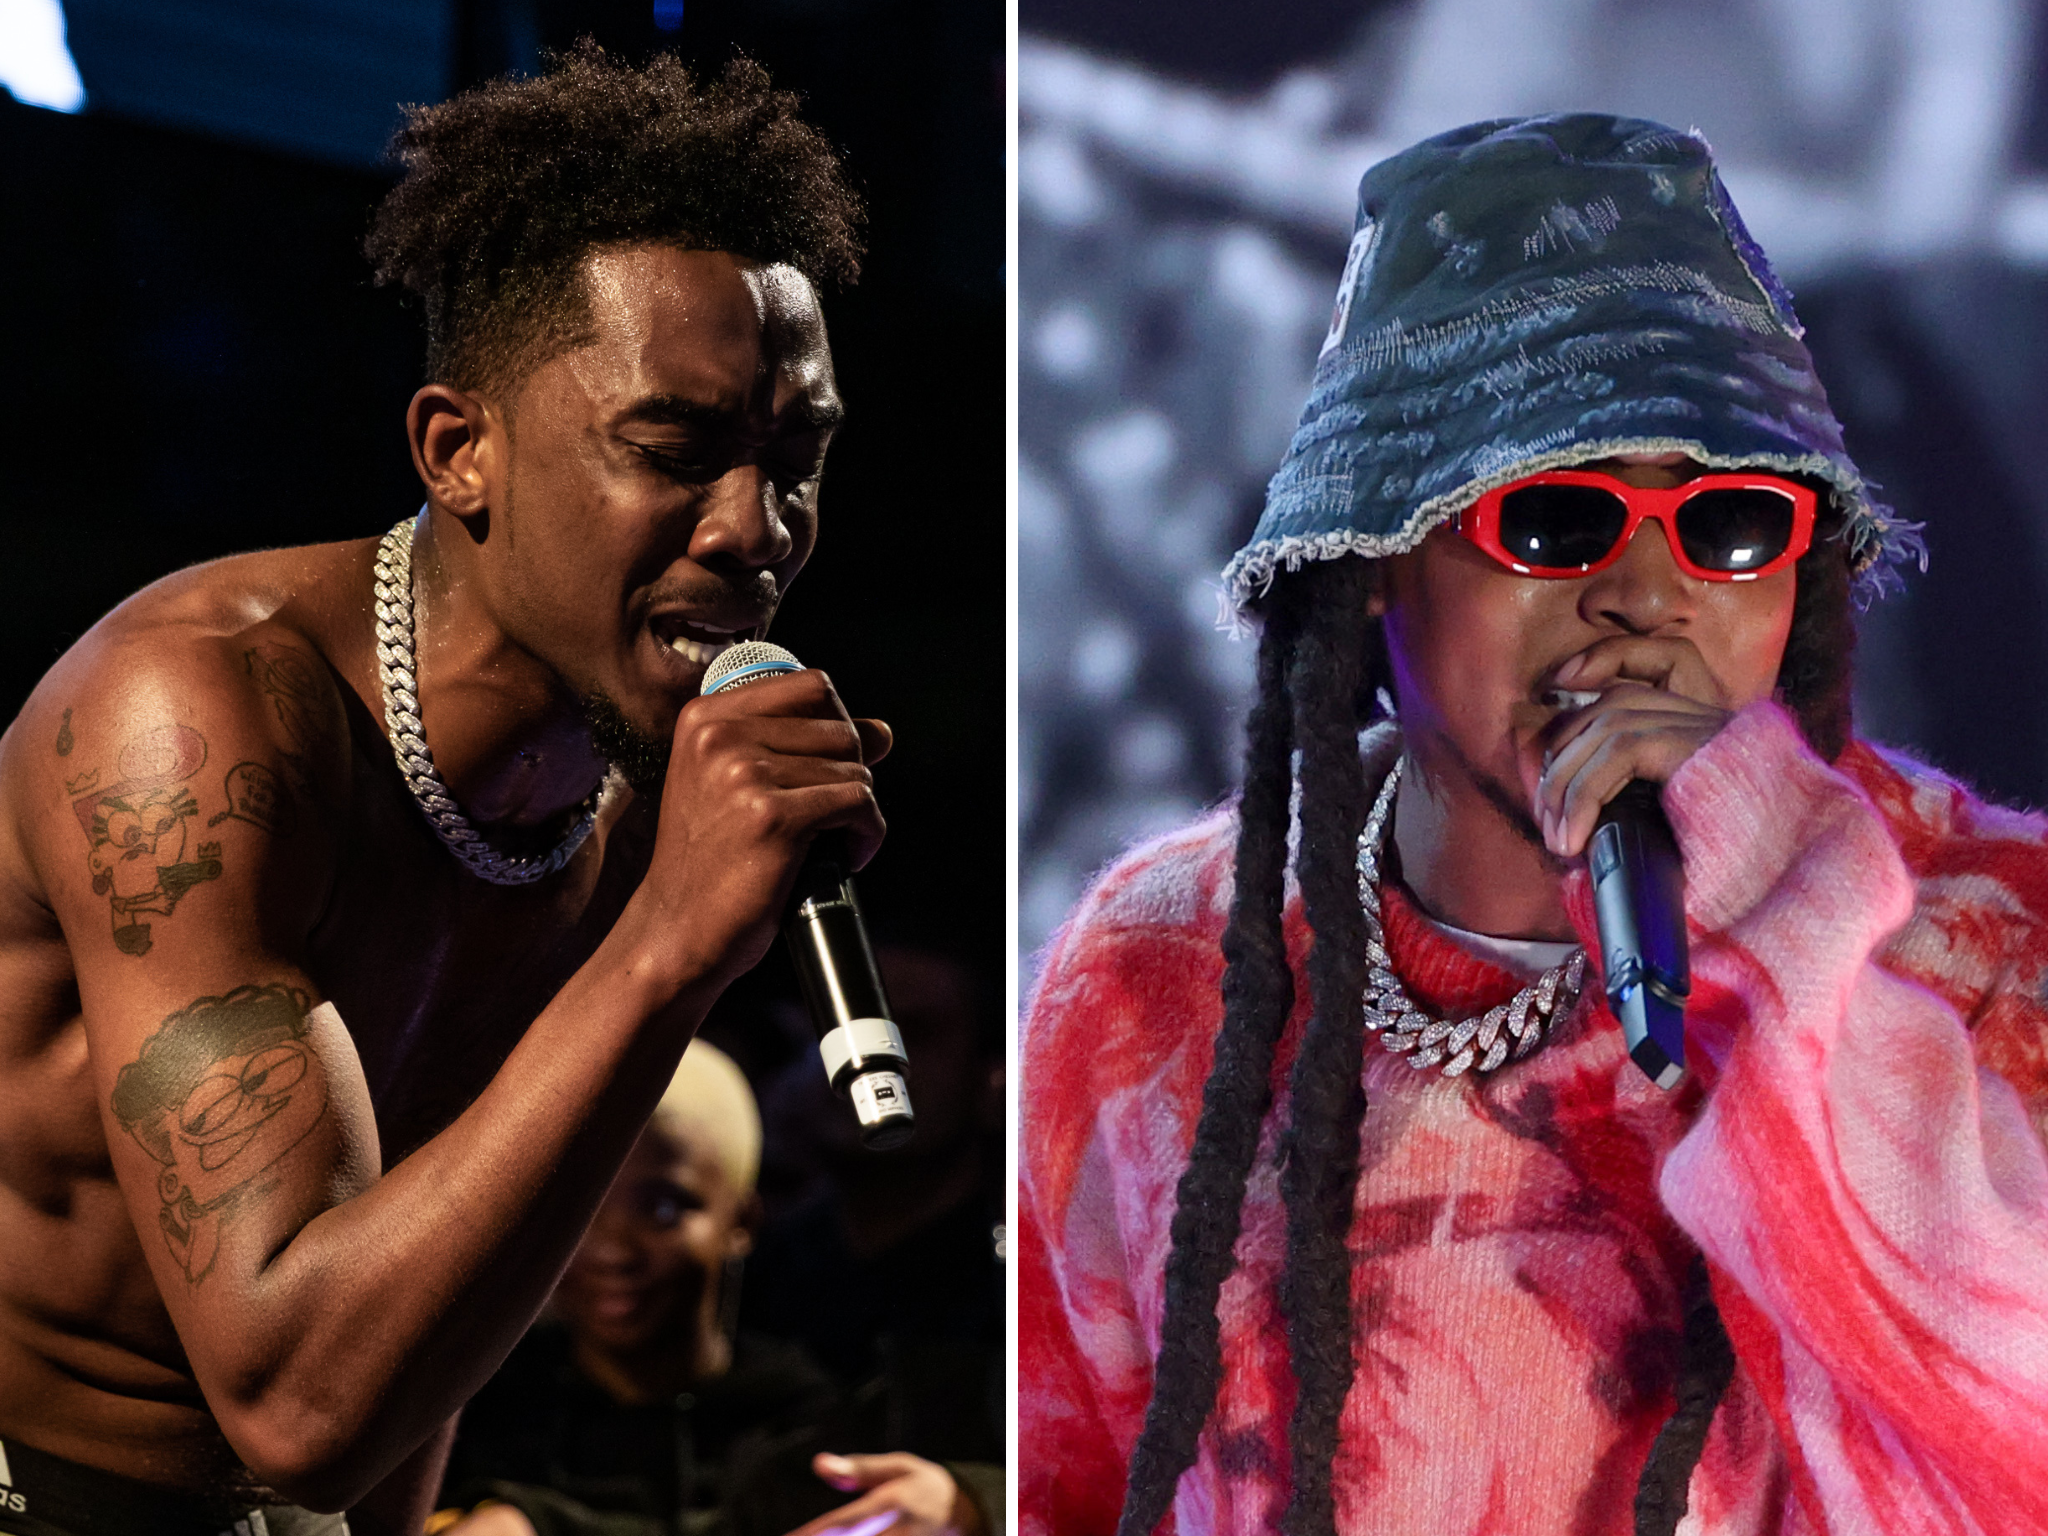 Desiigner says he's 'done with rap' as he tearfully mourns Takeoff's death